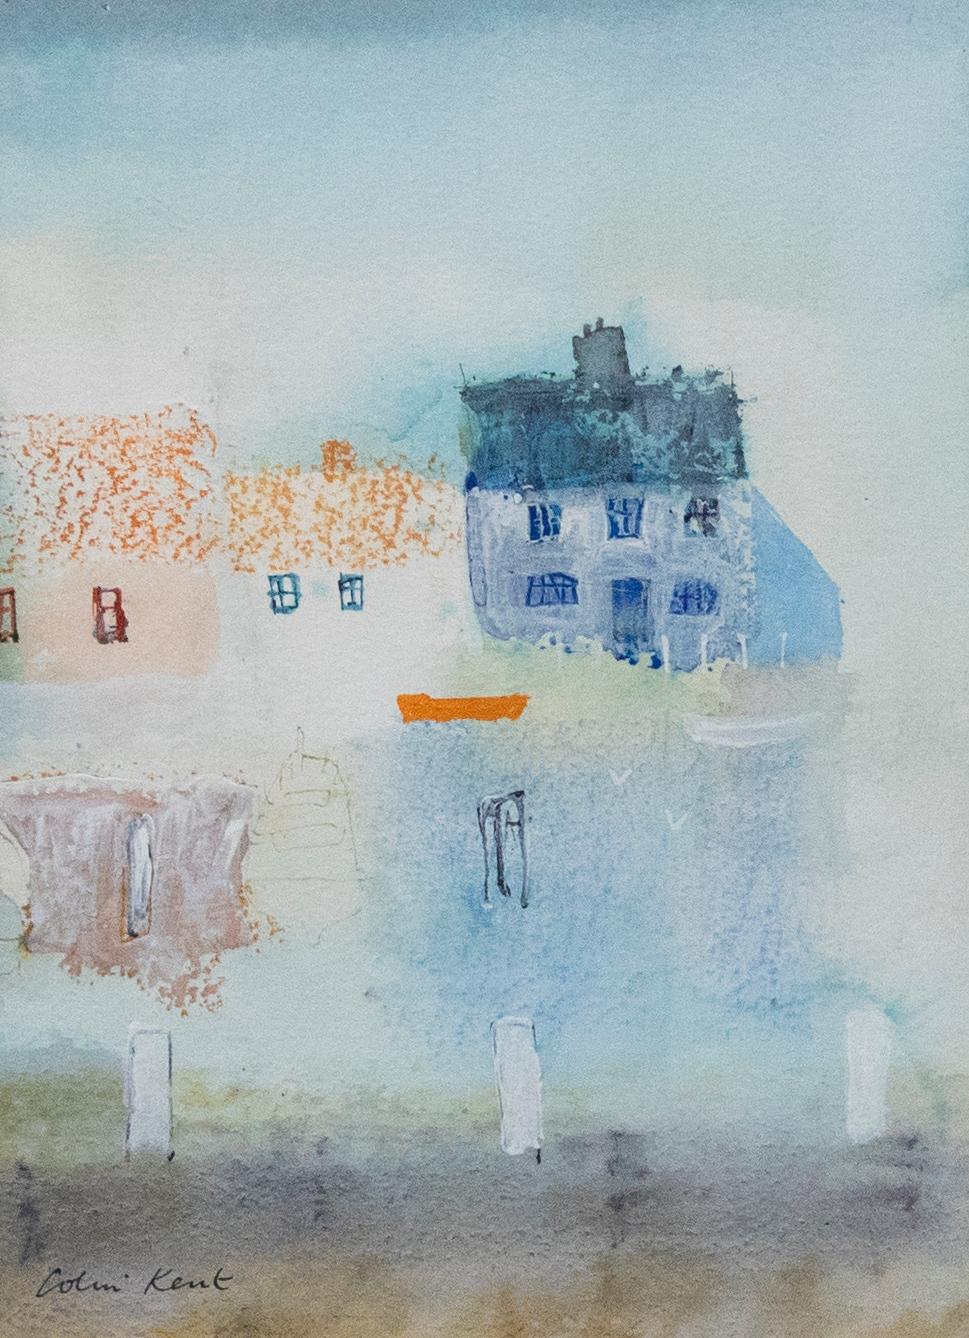 Subtle washes of ink and gouache have been used in conjunction with watercolour to create this atmospheric view of harbourside cottages. On first glance the composition sparks an initial sense of simplicity, but on closer inspection Kent's distinct